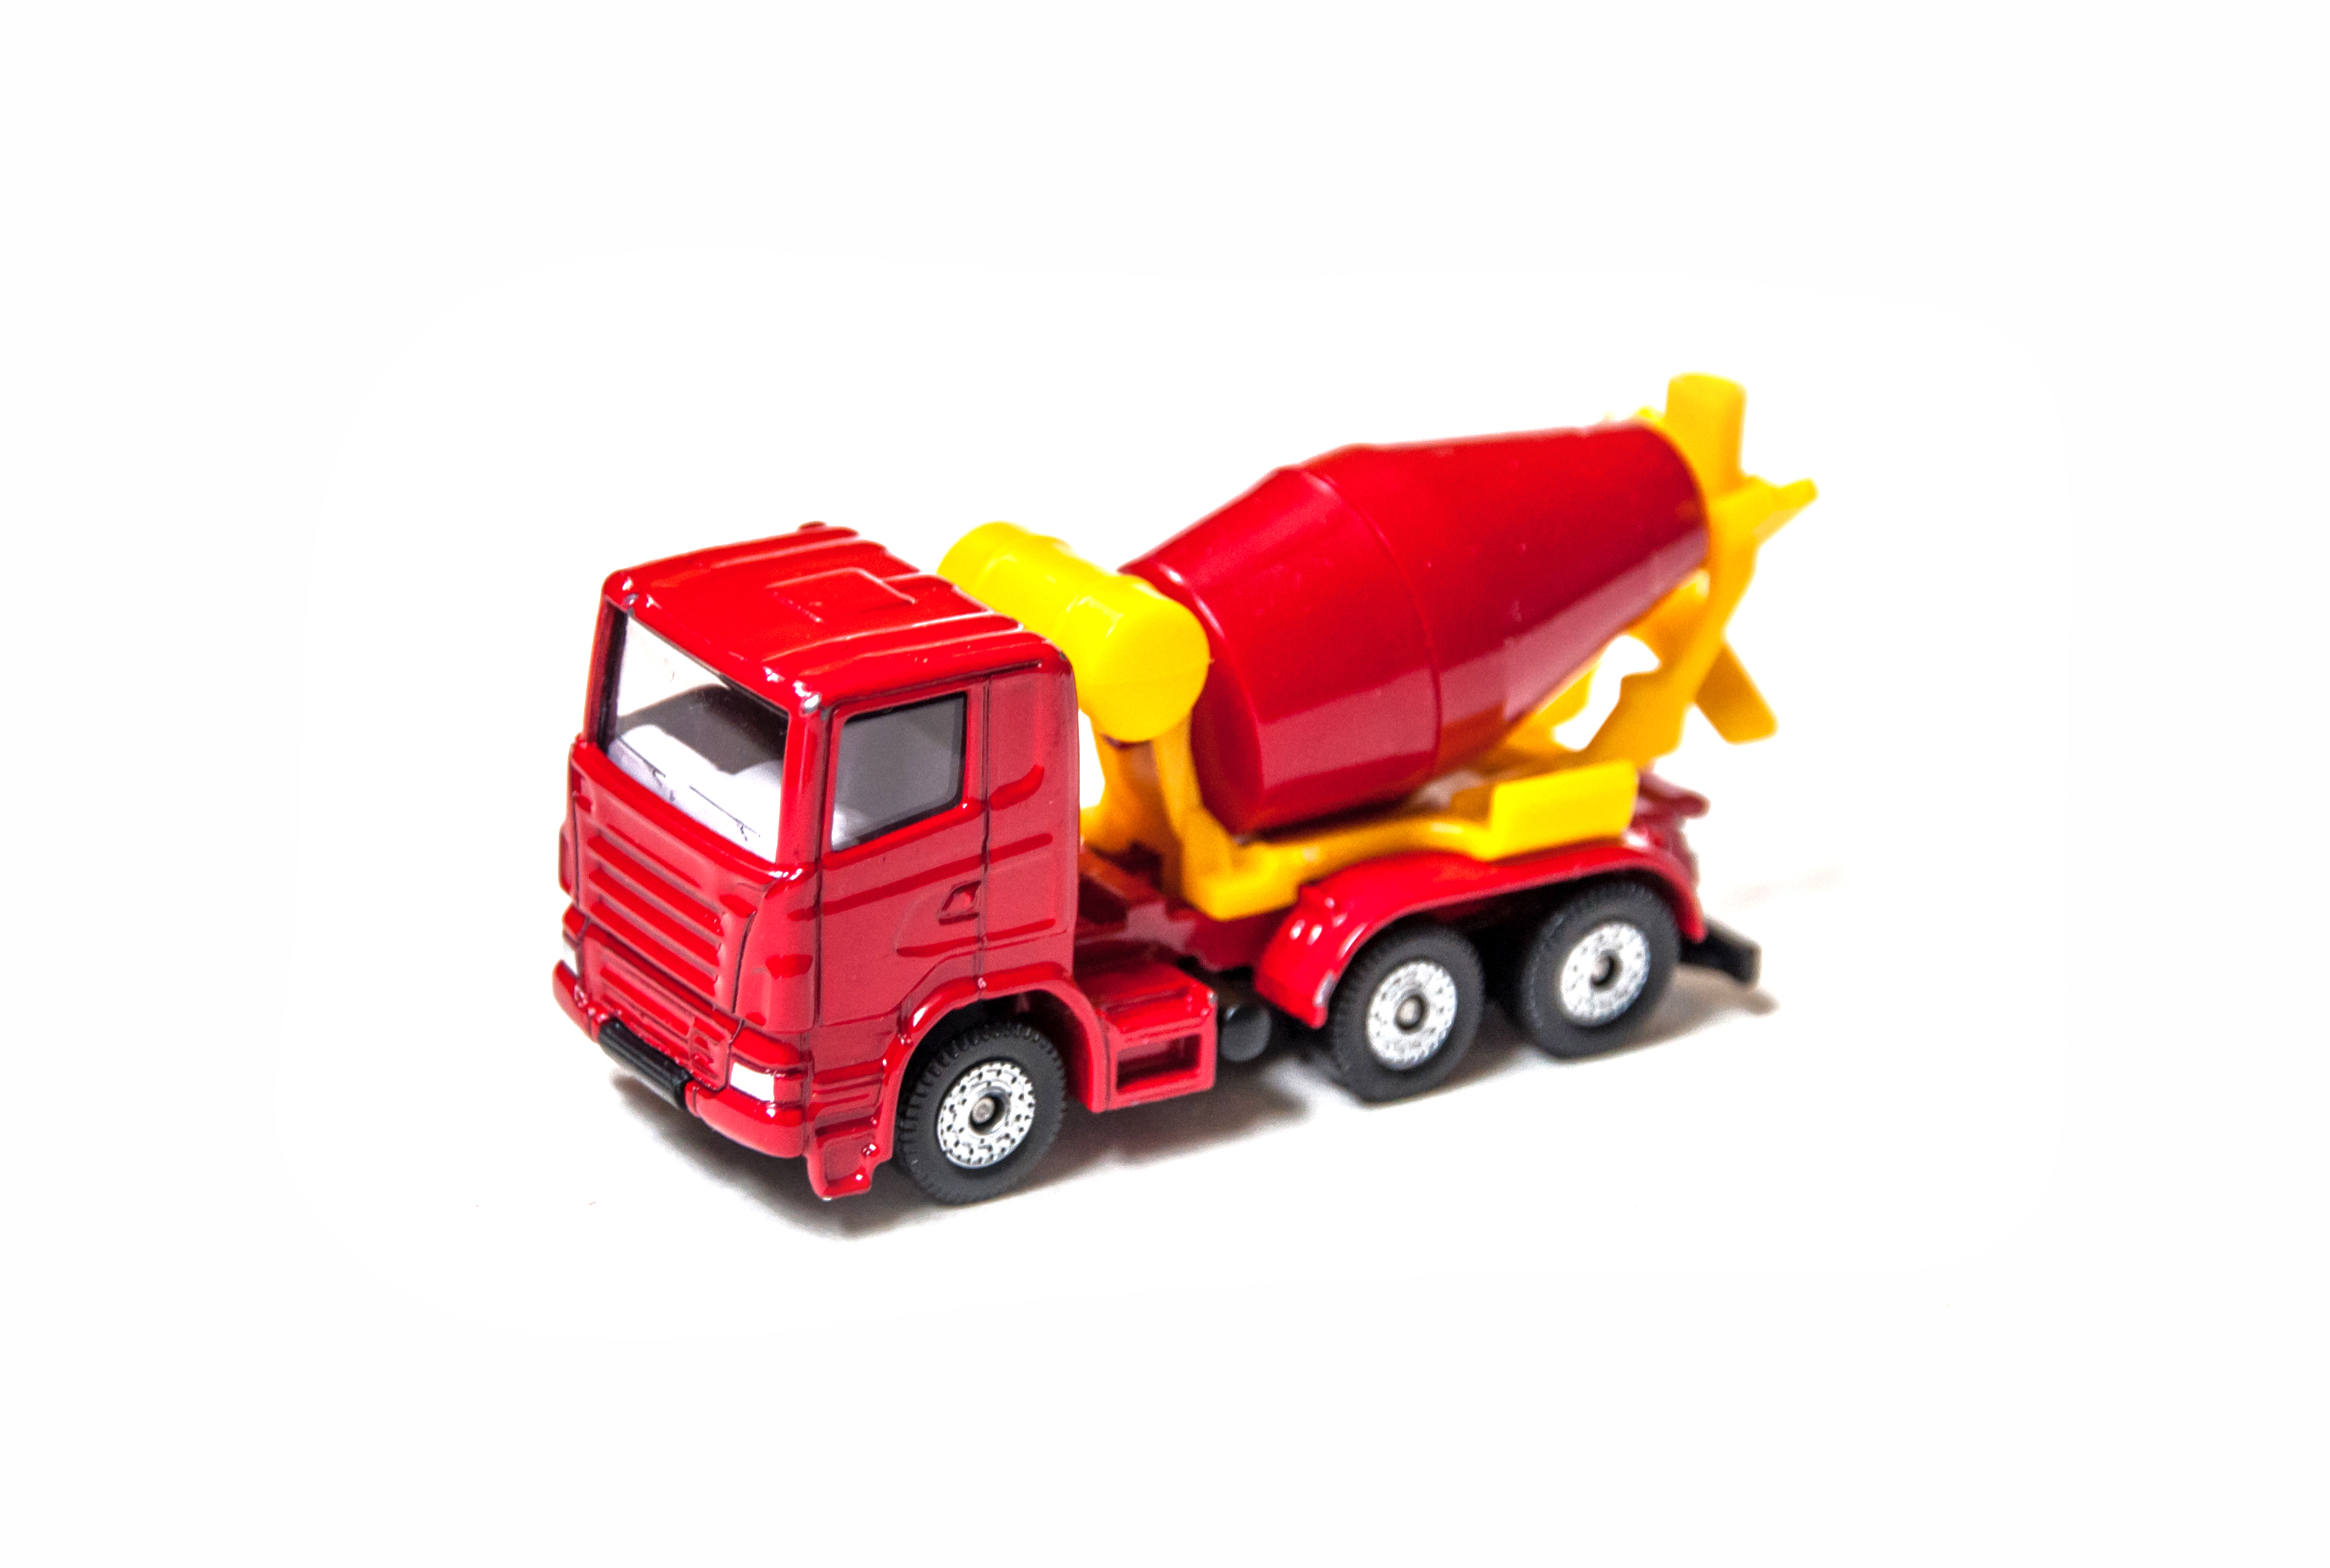 Toy truck isolated over white background photo